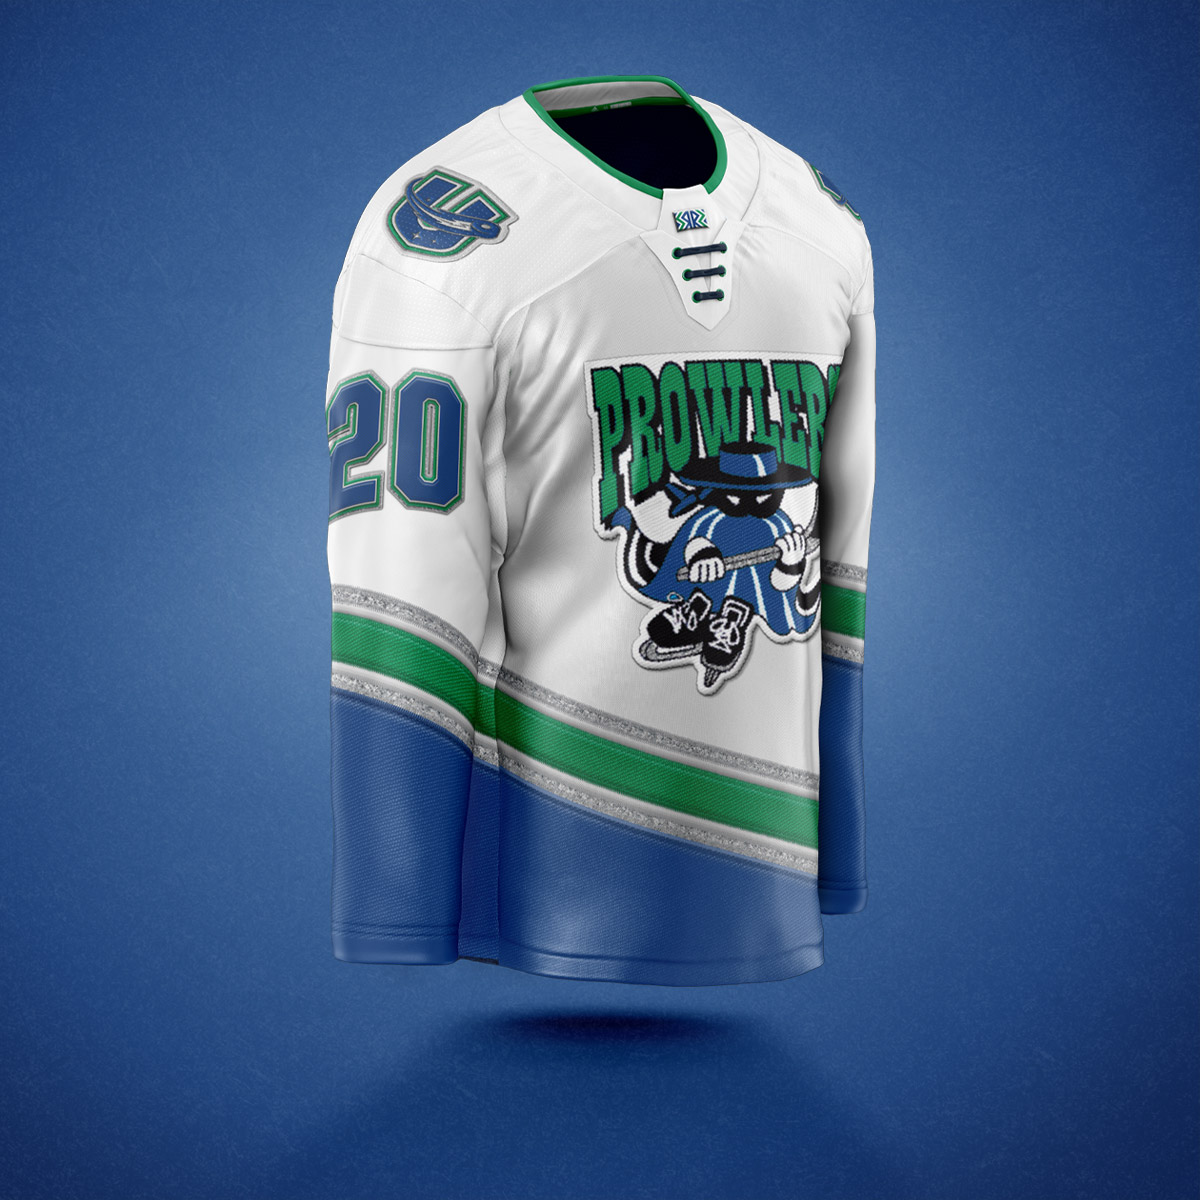 Playing with Fire, Teen Designs Own New Look Utica Comets Jerseys